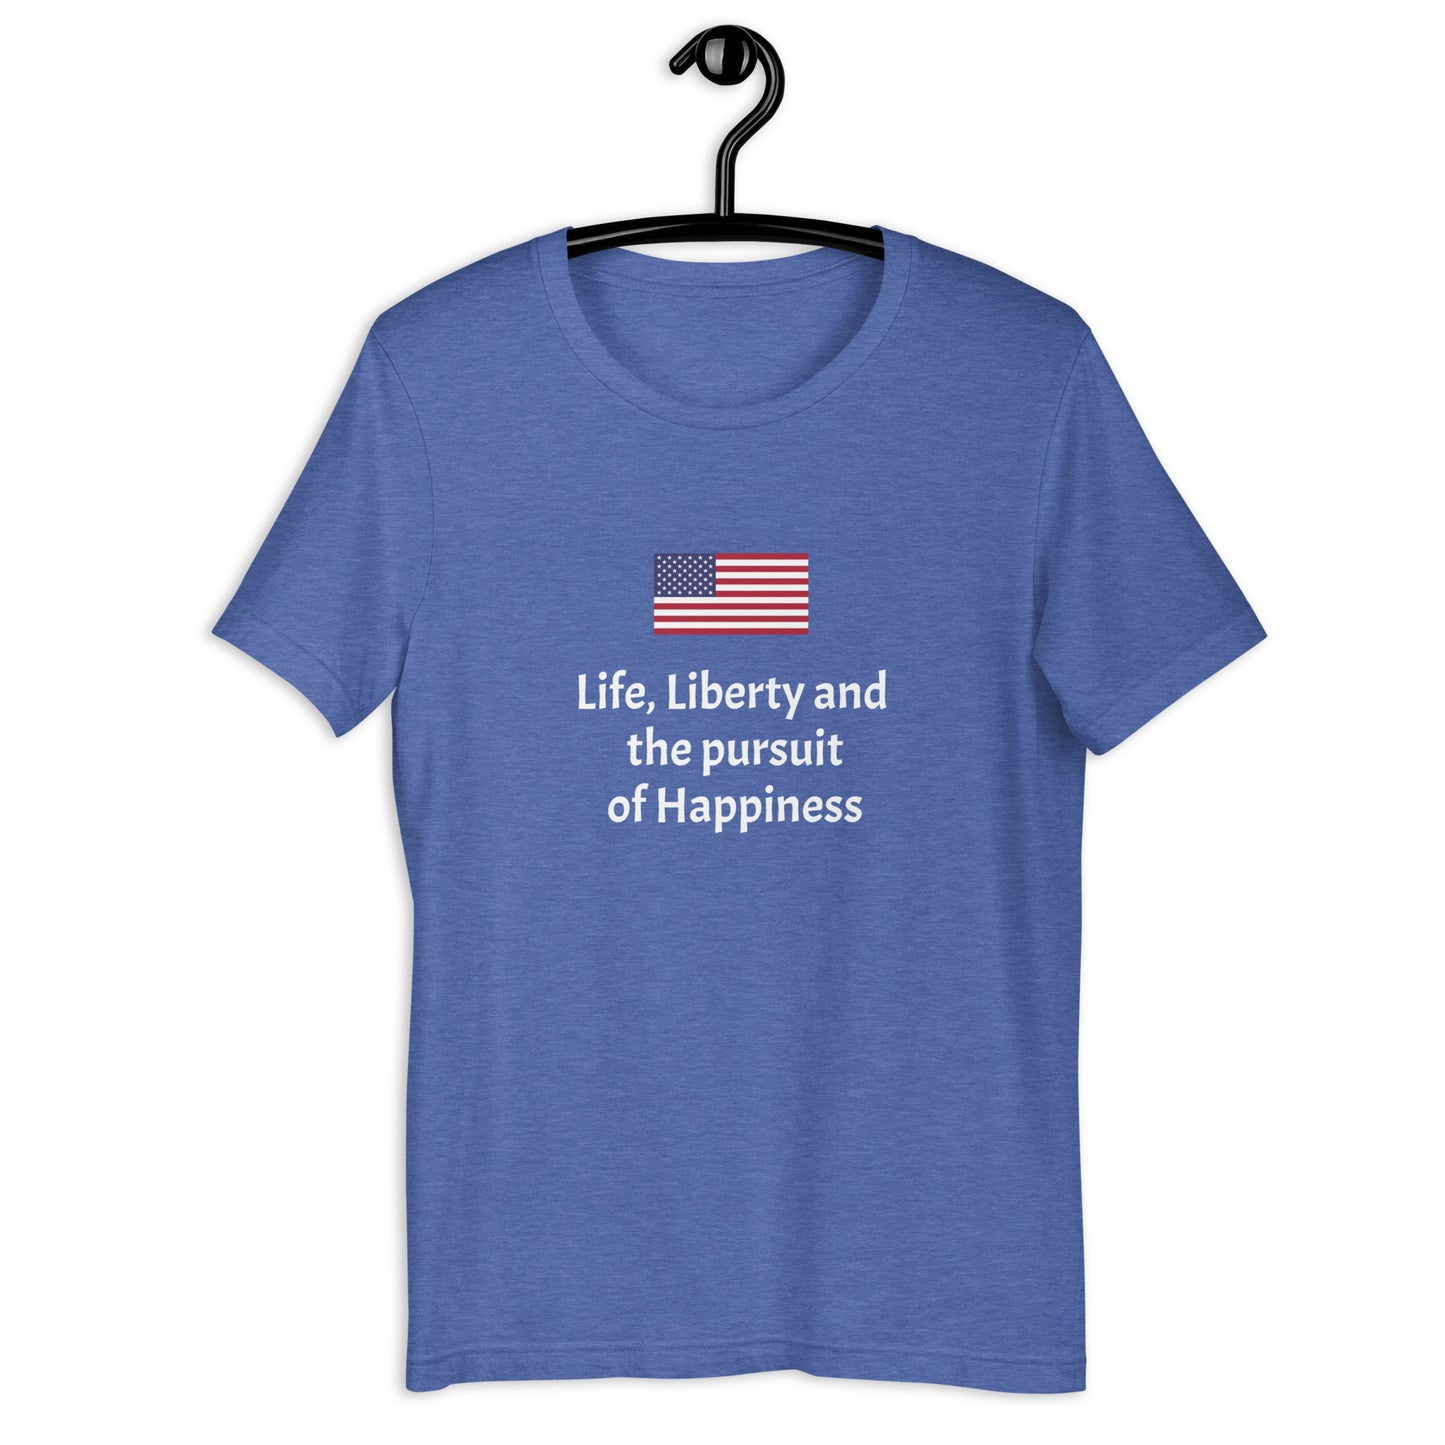 Life, Liberty and the pursuit of Happiness unisex t-shirt